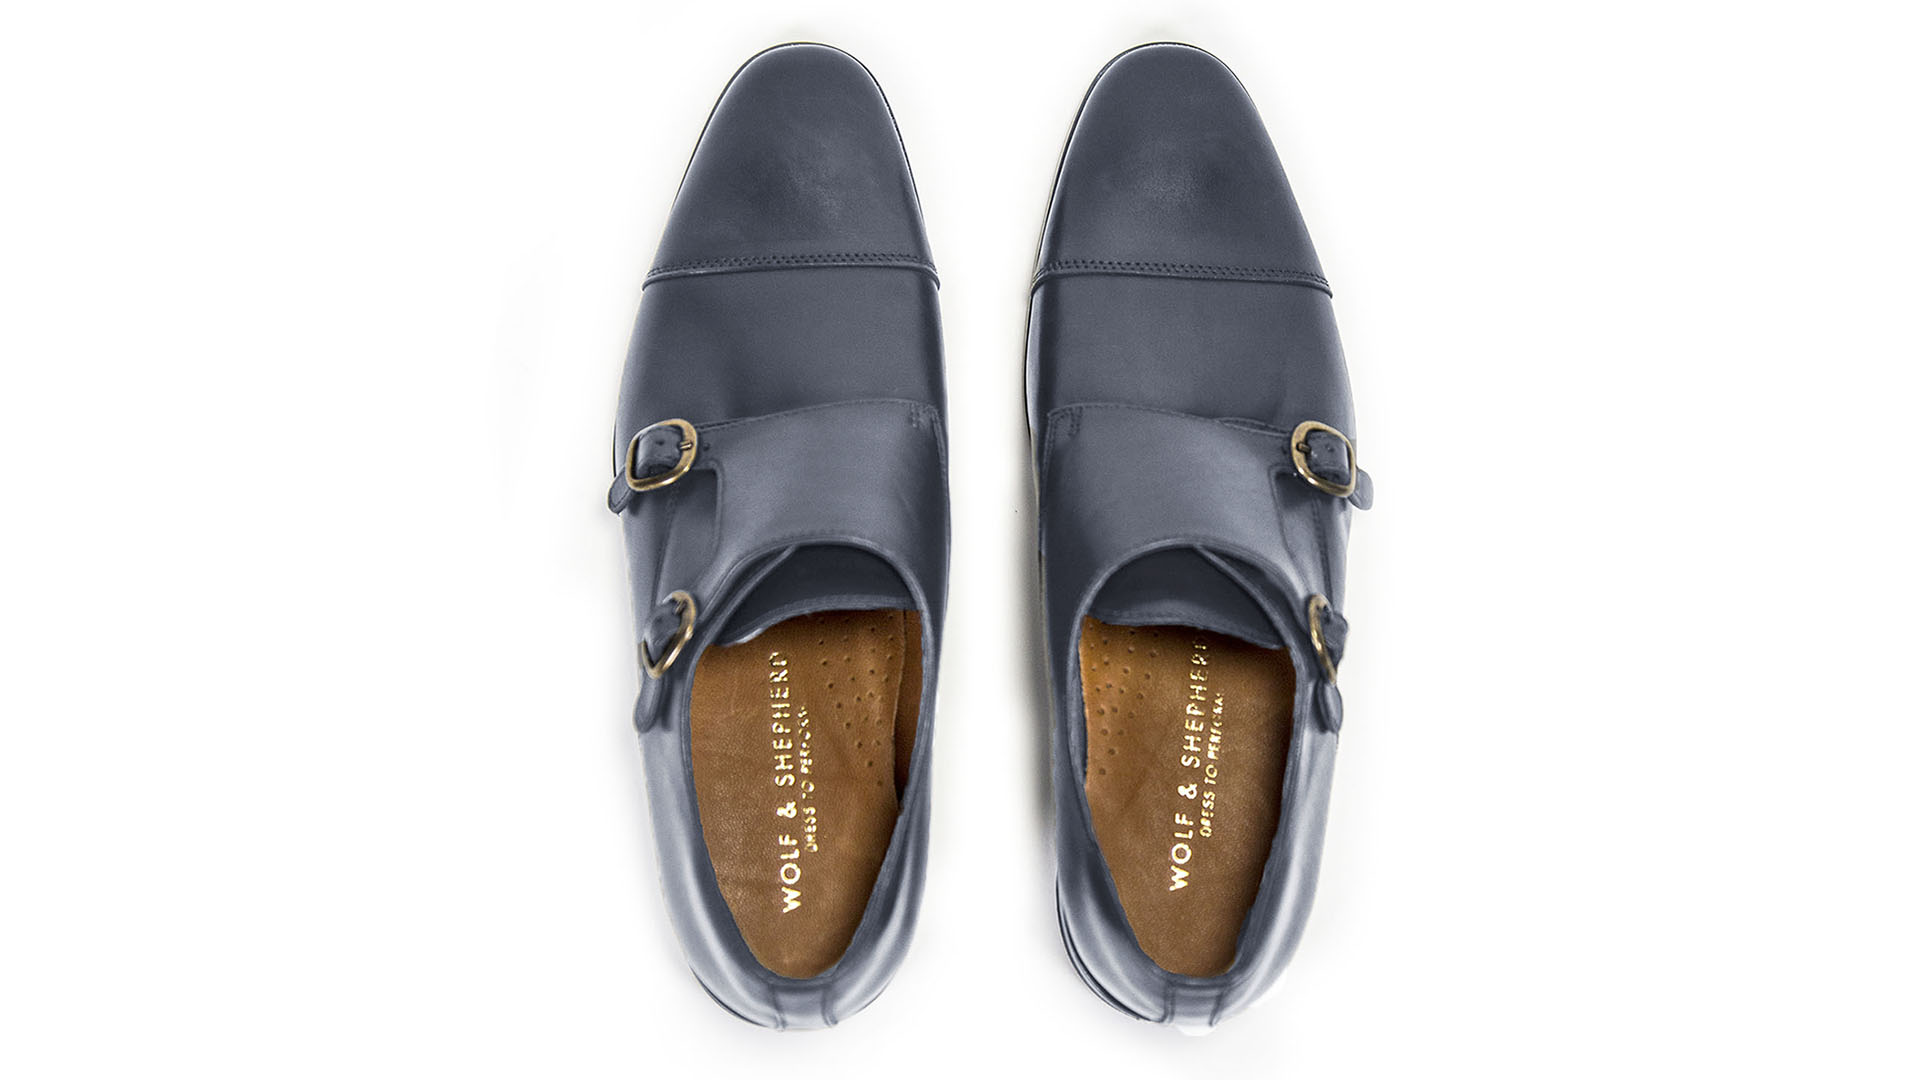 wolf and shepherd gambit double monk strap shoe review